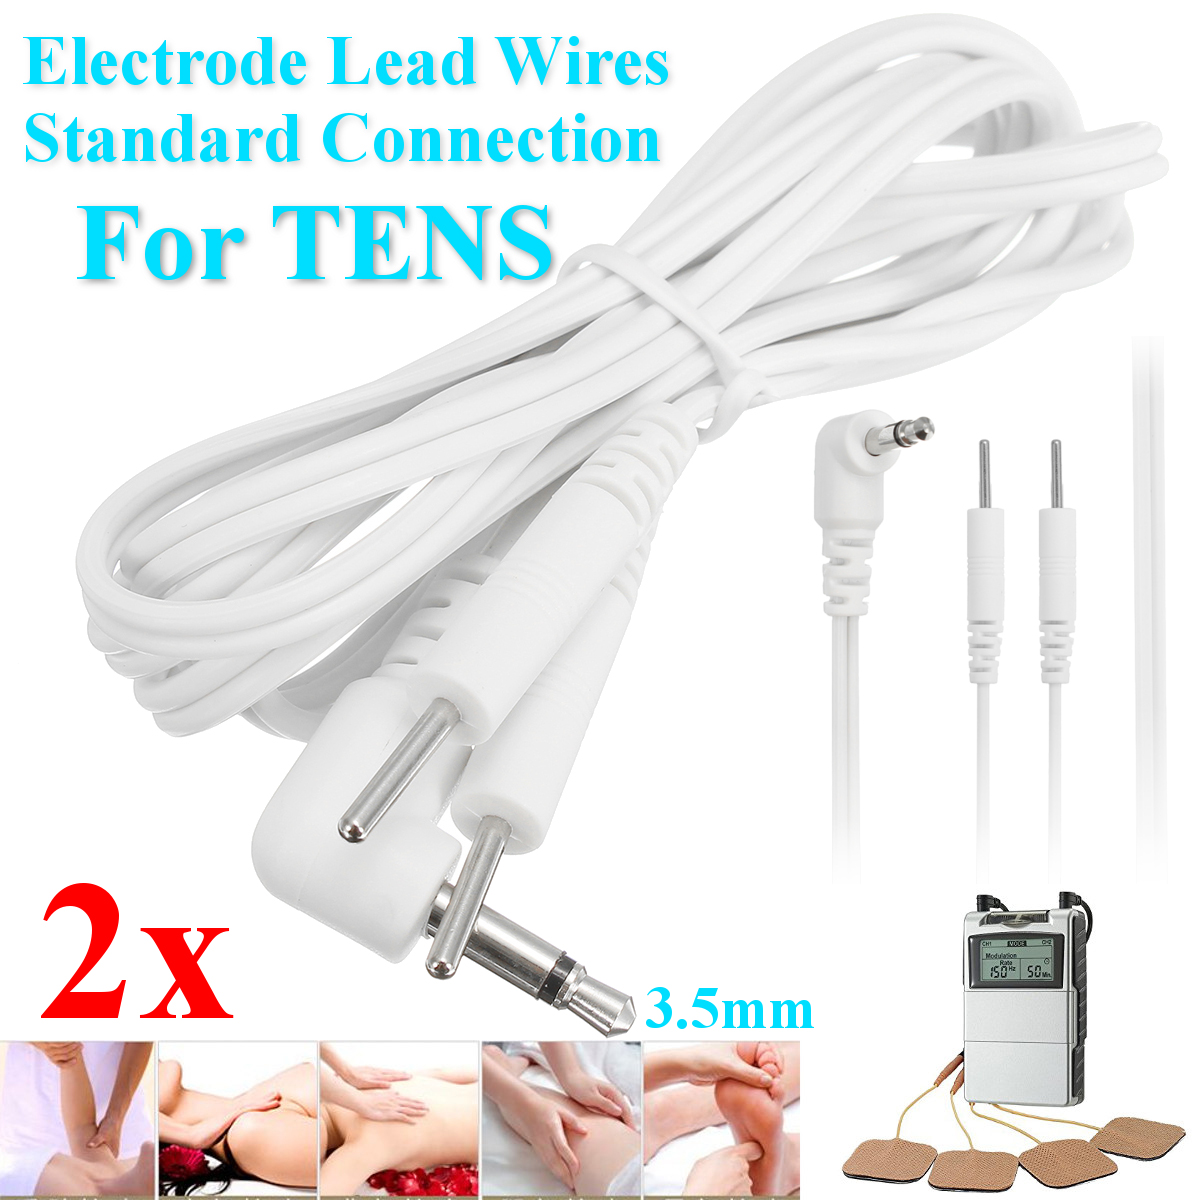 2Pcs-35mm-Replacement-Electrode-Pads-Lead-Cable-Wire-Connection-for-Tens-Electric-Massager-1300190